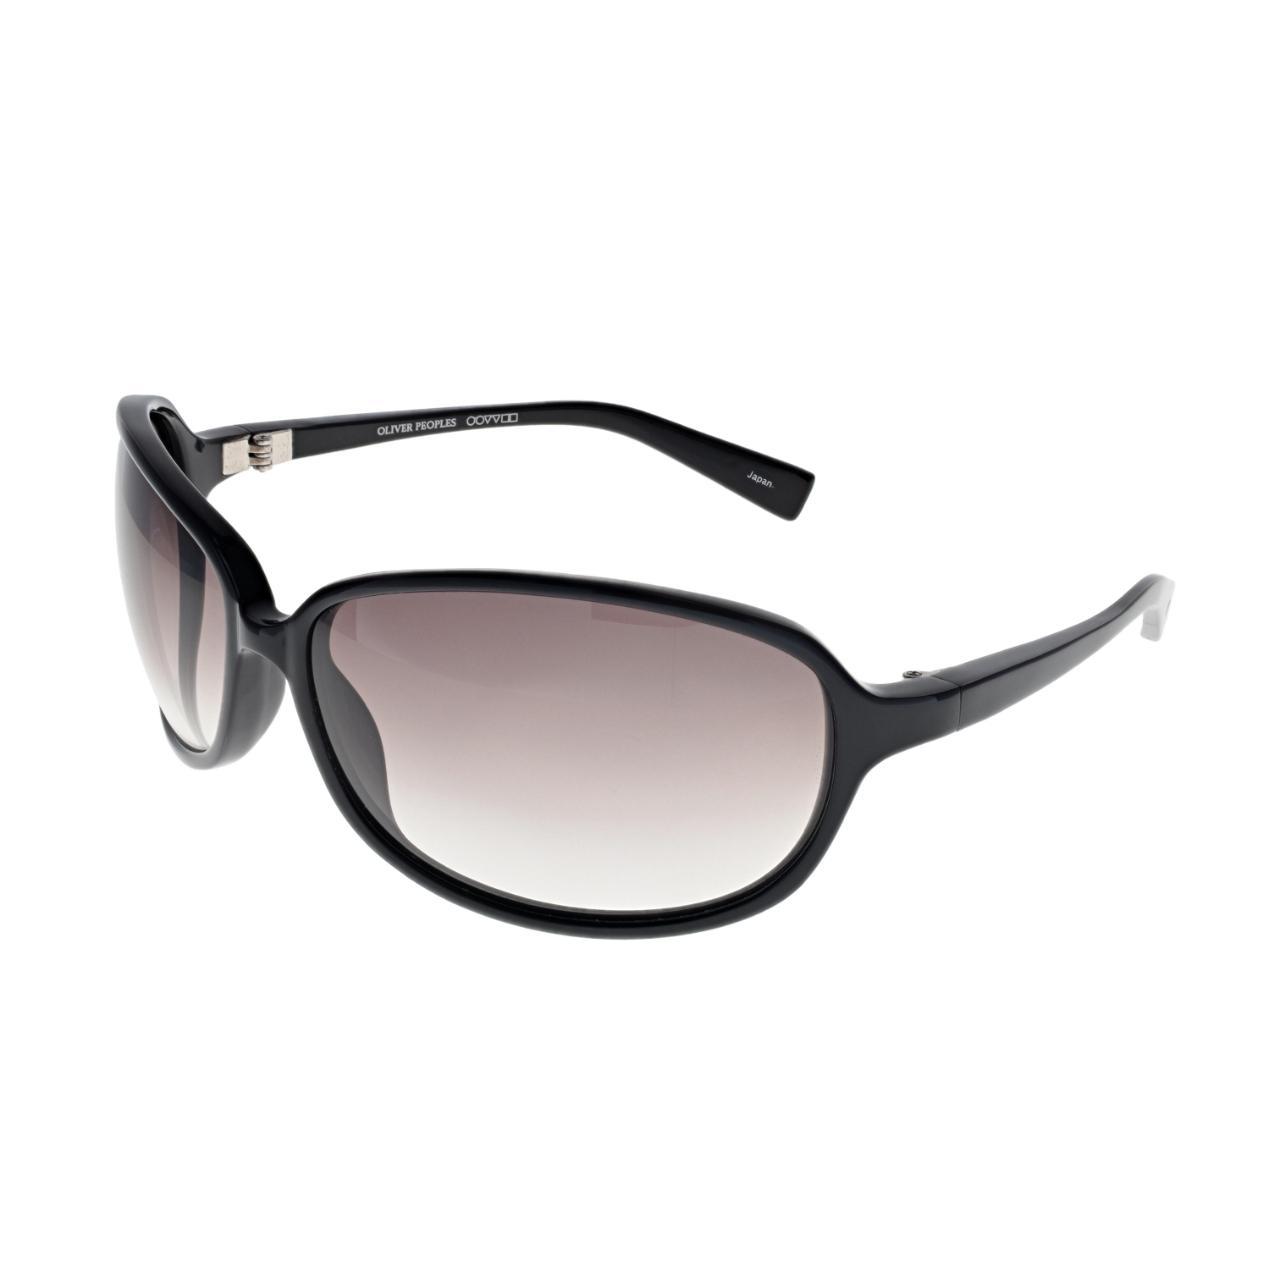 Oliver Peoples Women's Black and Grey Sunglasses